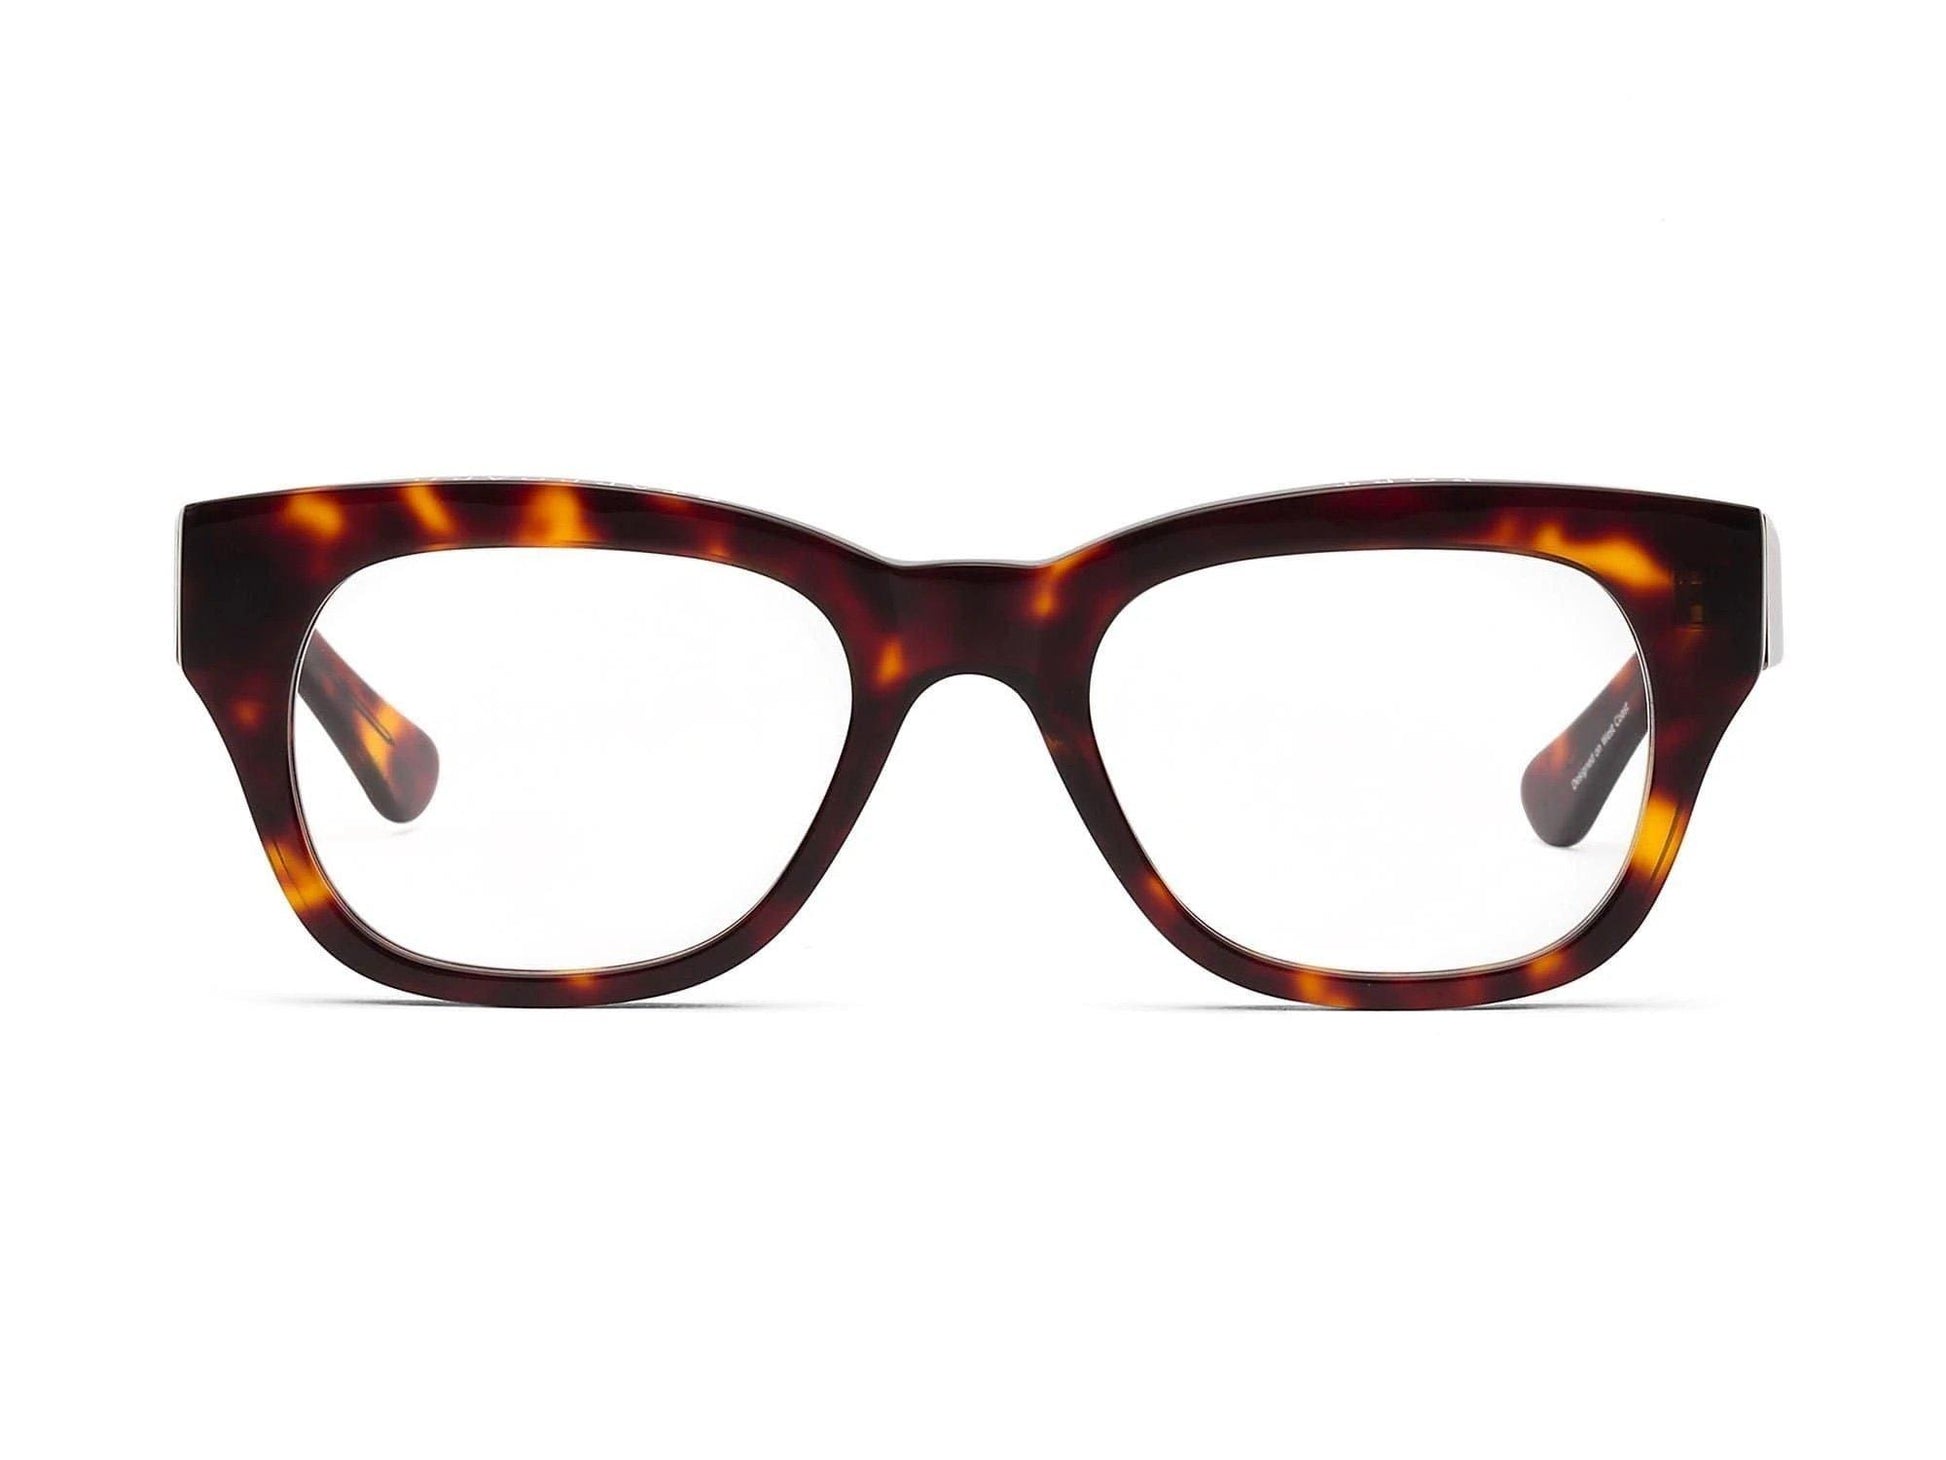 Miklos Reading Glasses by Caddis - Haven